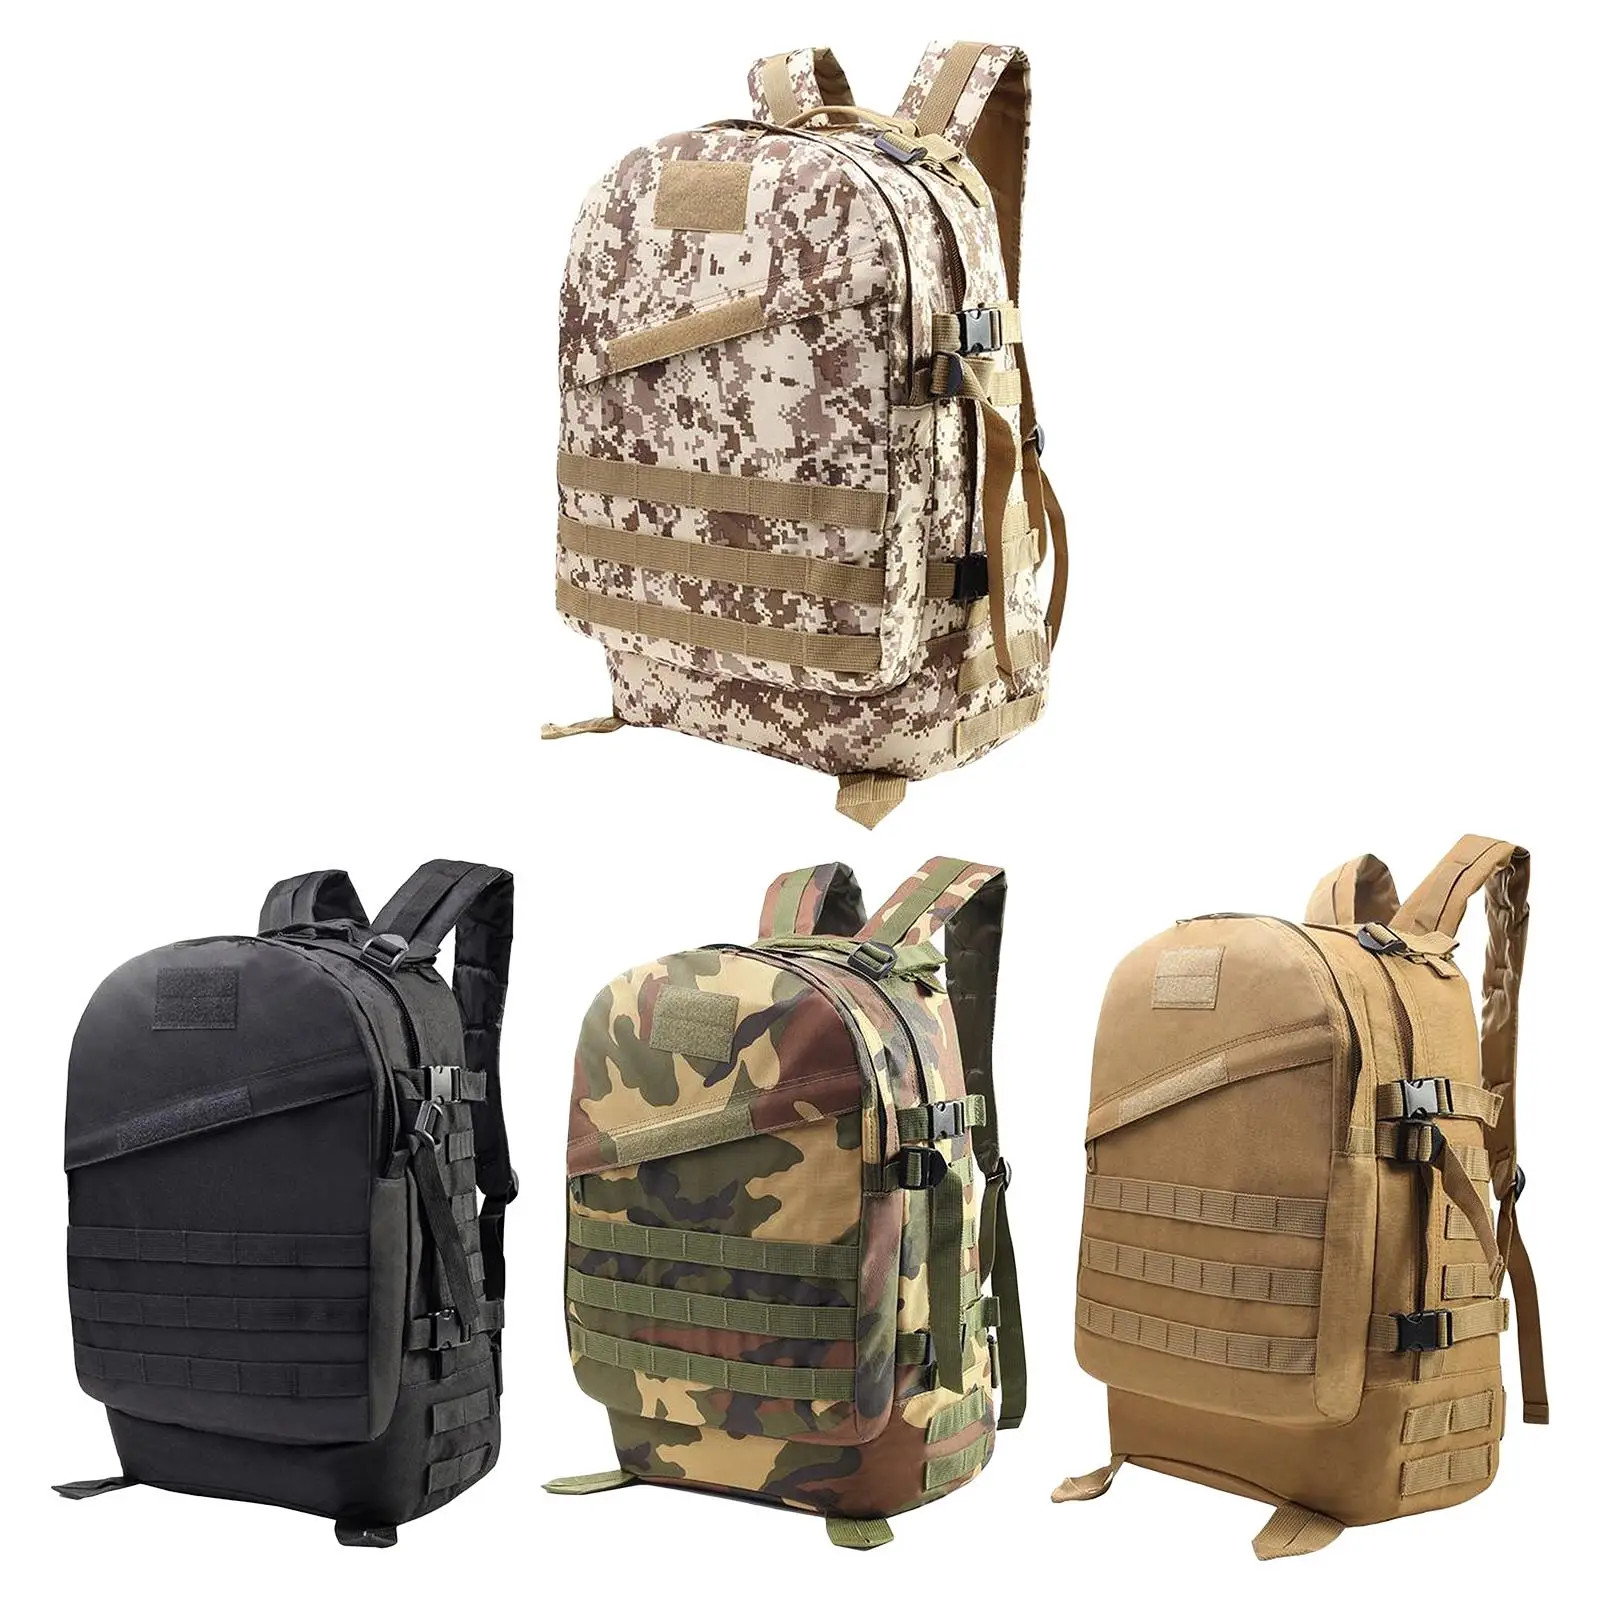 40L Military Tactical Backpack Outdoor Backpack Waterproof Shoulder Camping Hiking Military Traveling backpack